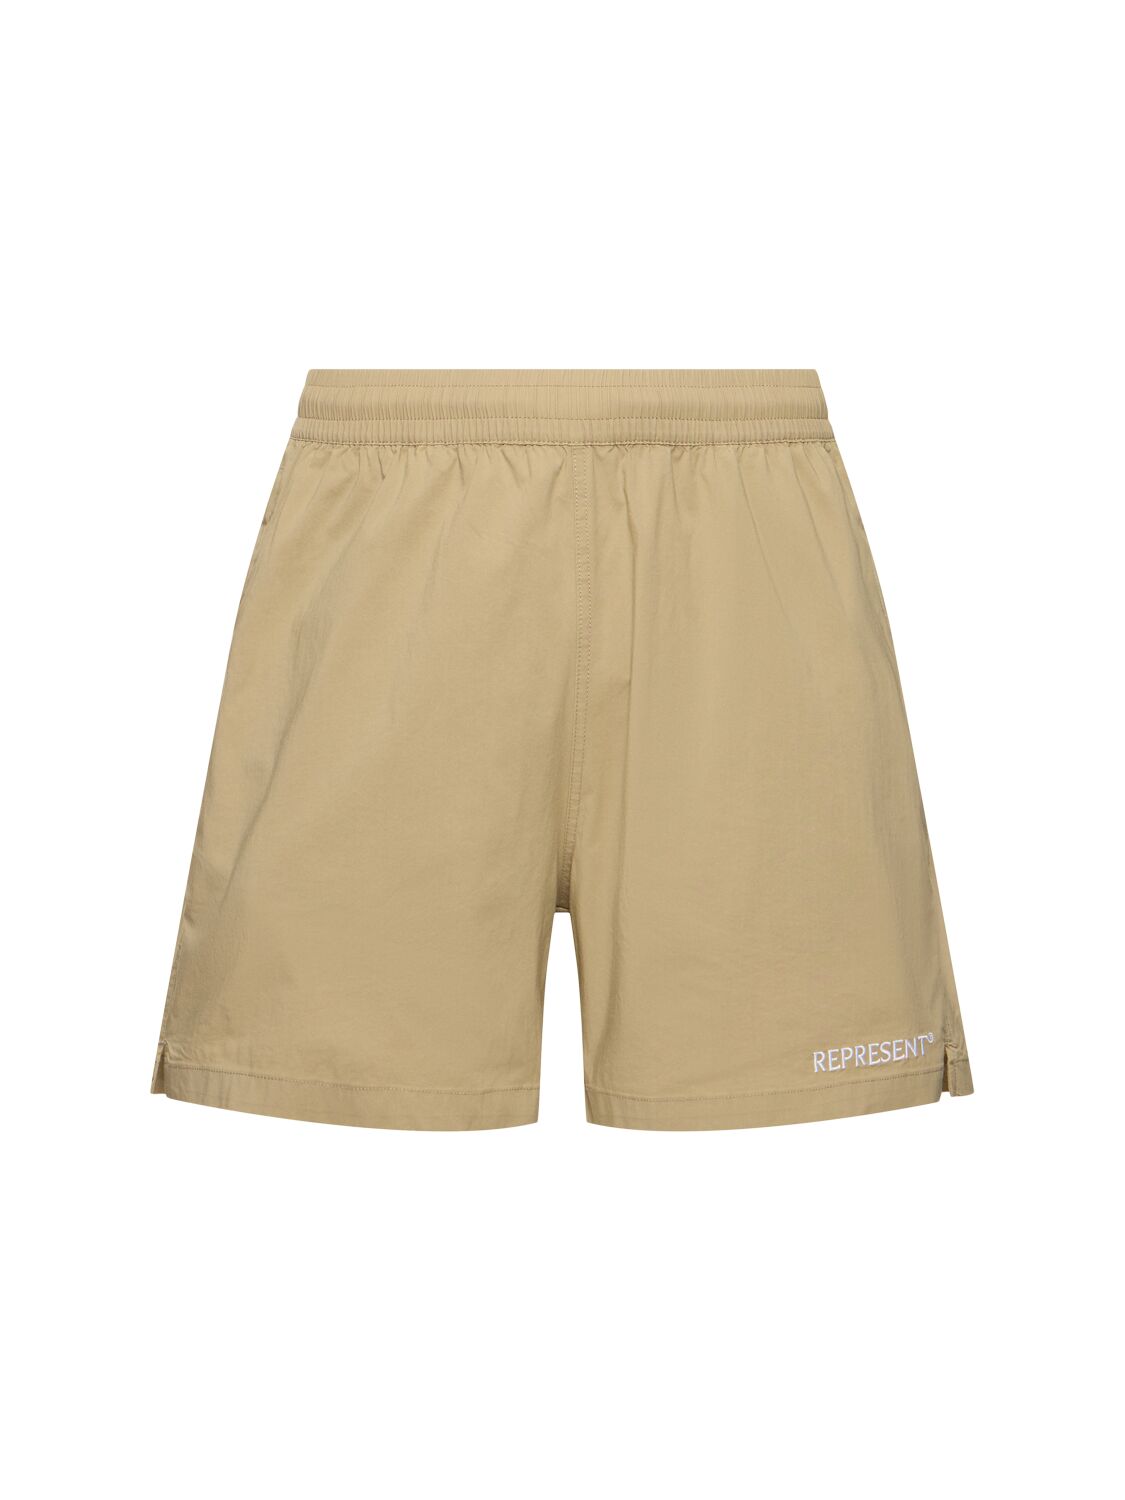 Represent Cotton Blend Shorts In Washed Taupe